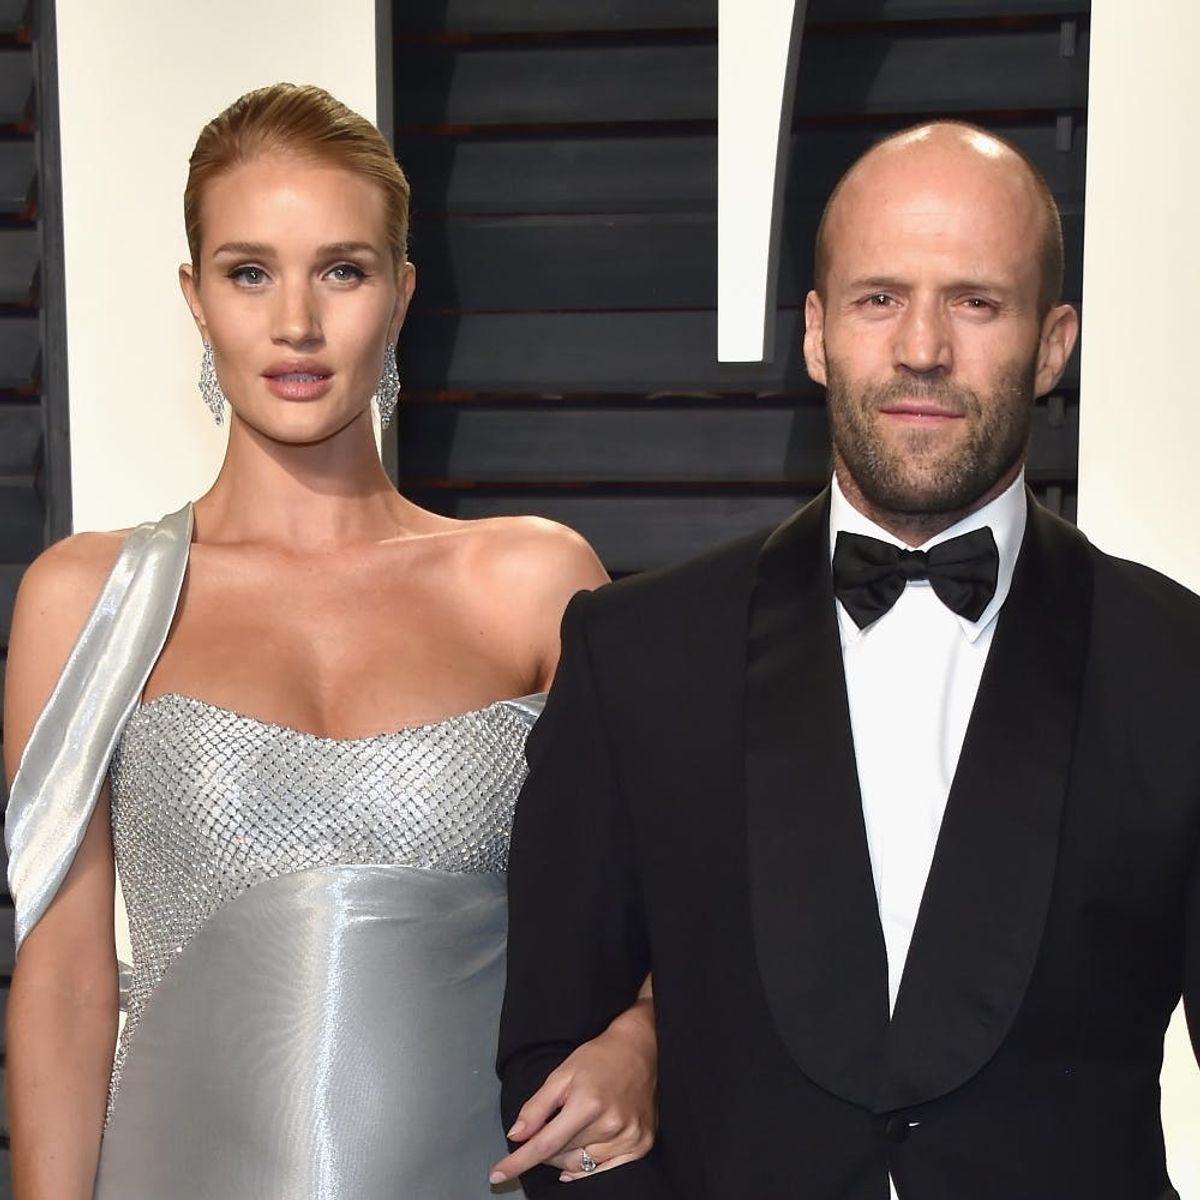 Rosie Huntington-Whiteley and Jason Statham Had Their Baby Boy and His First Pic Is Adorable